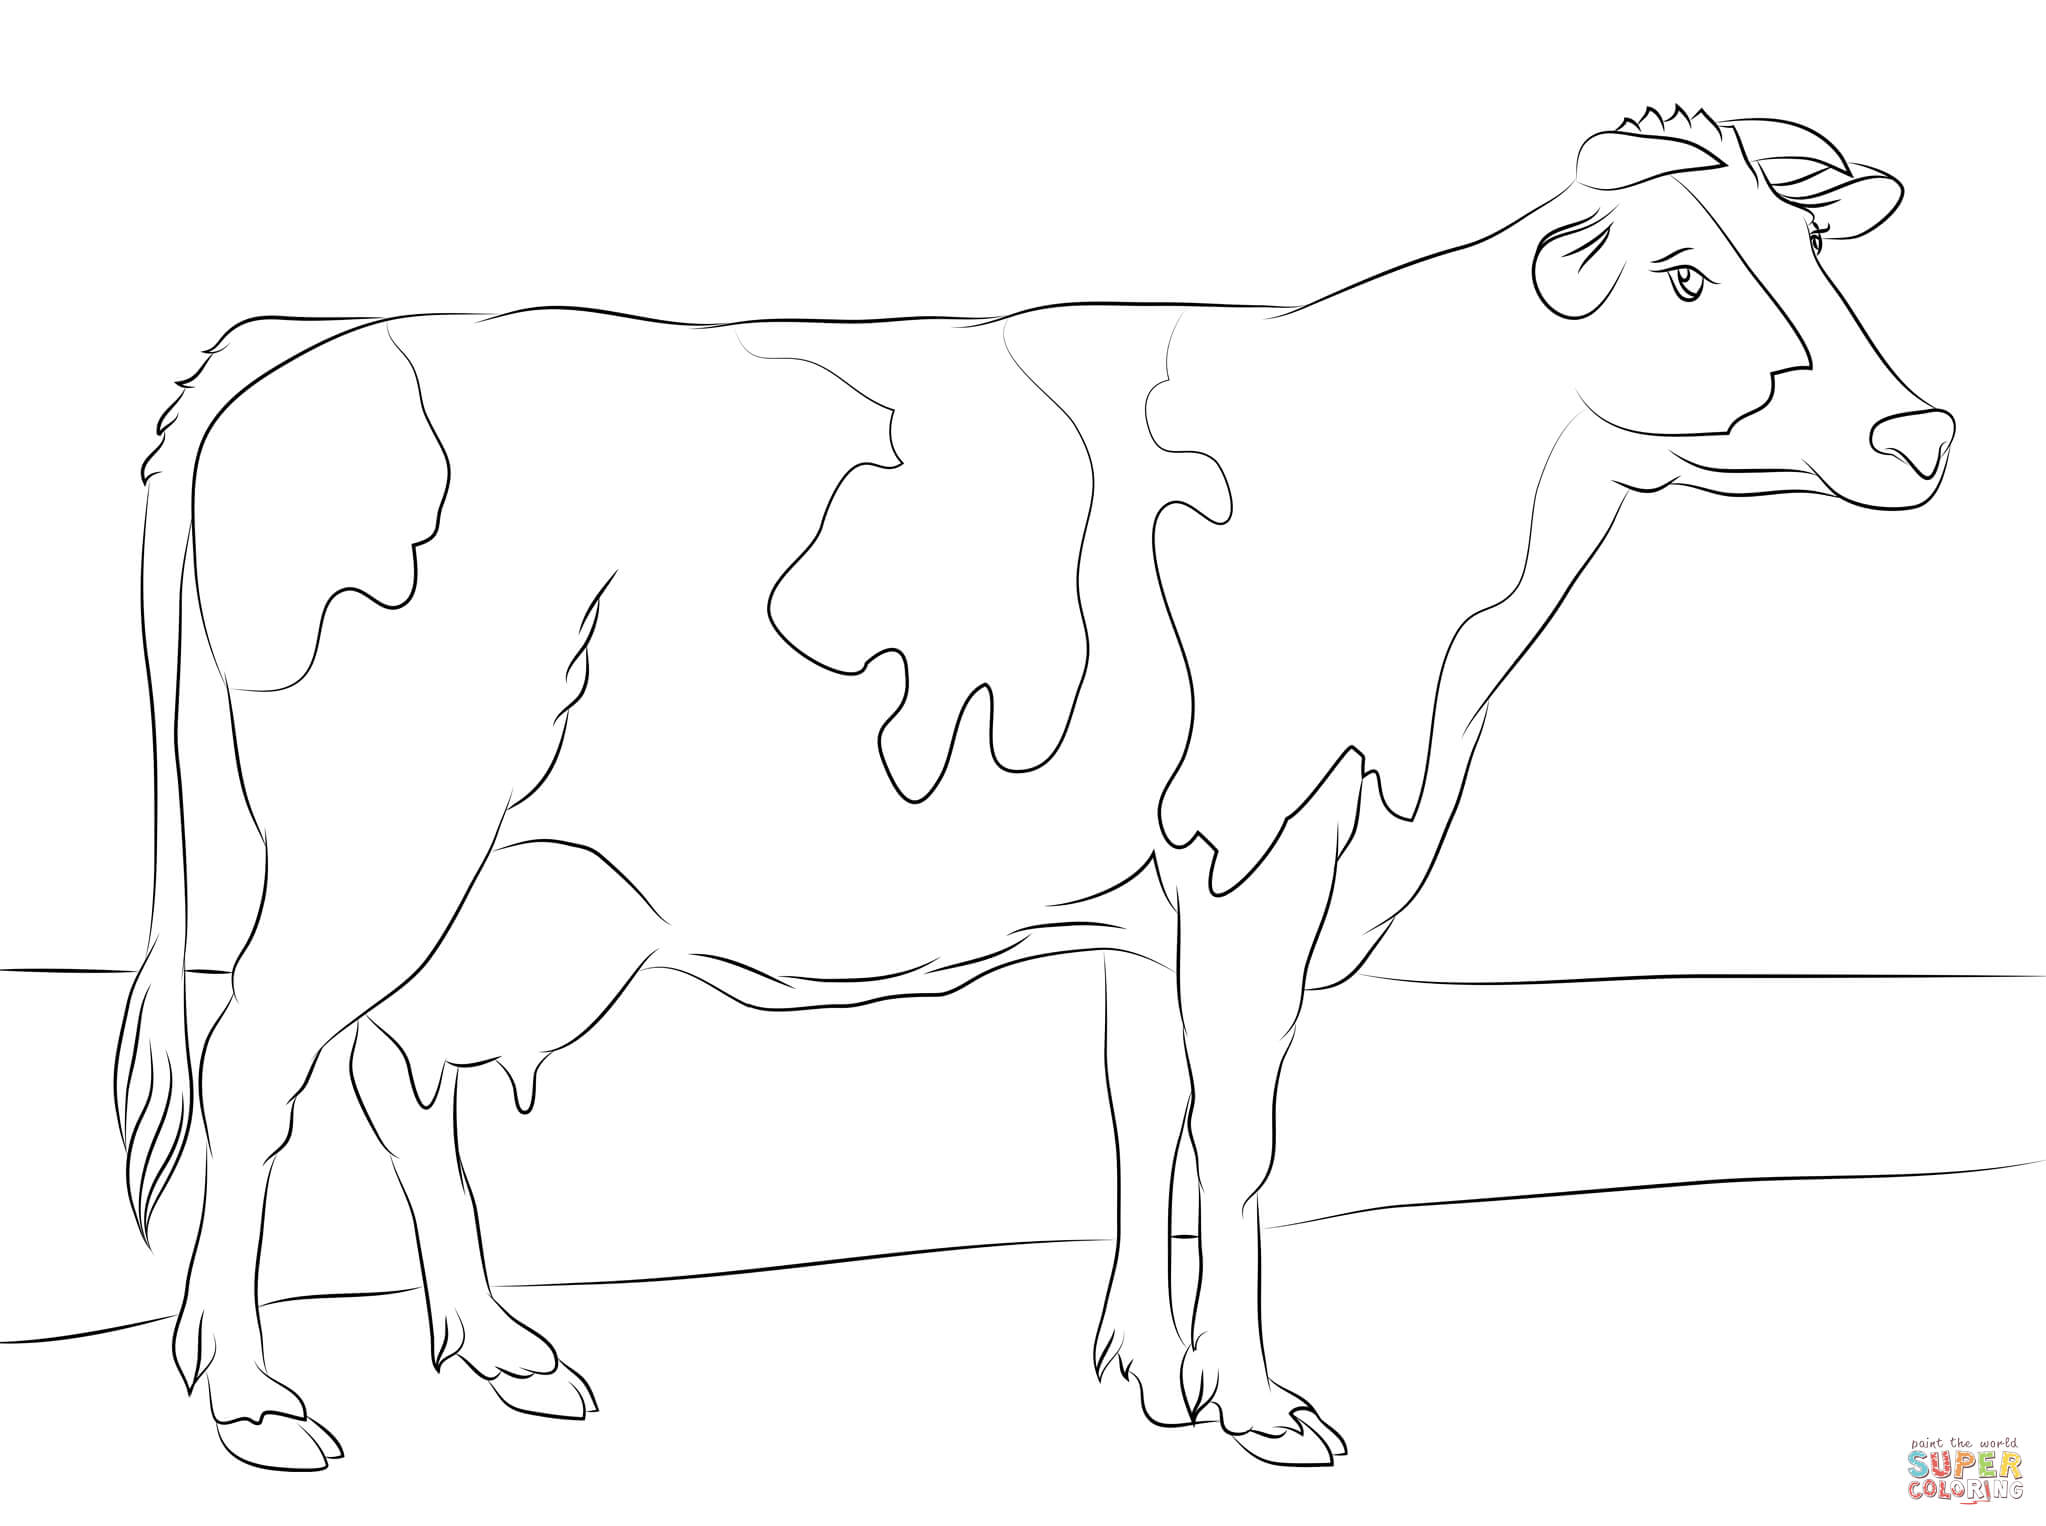  Free Cow Printable Coloring Pages Download Free Cow Printable Coloring 